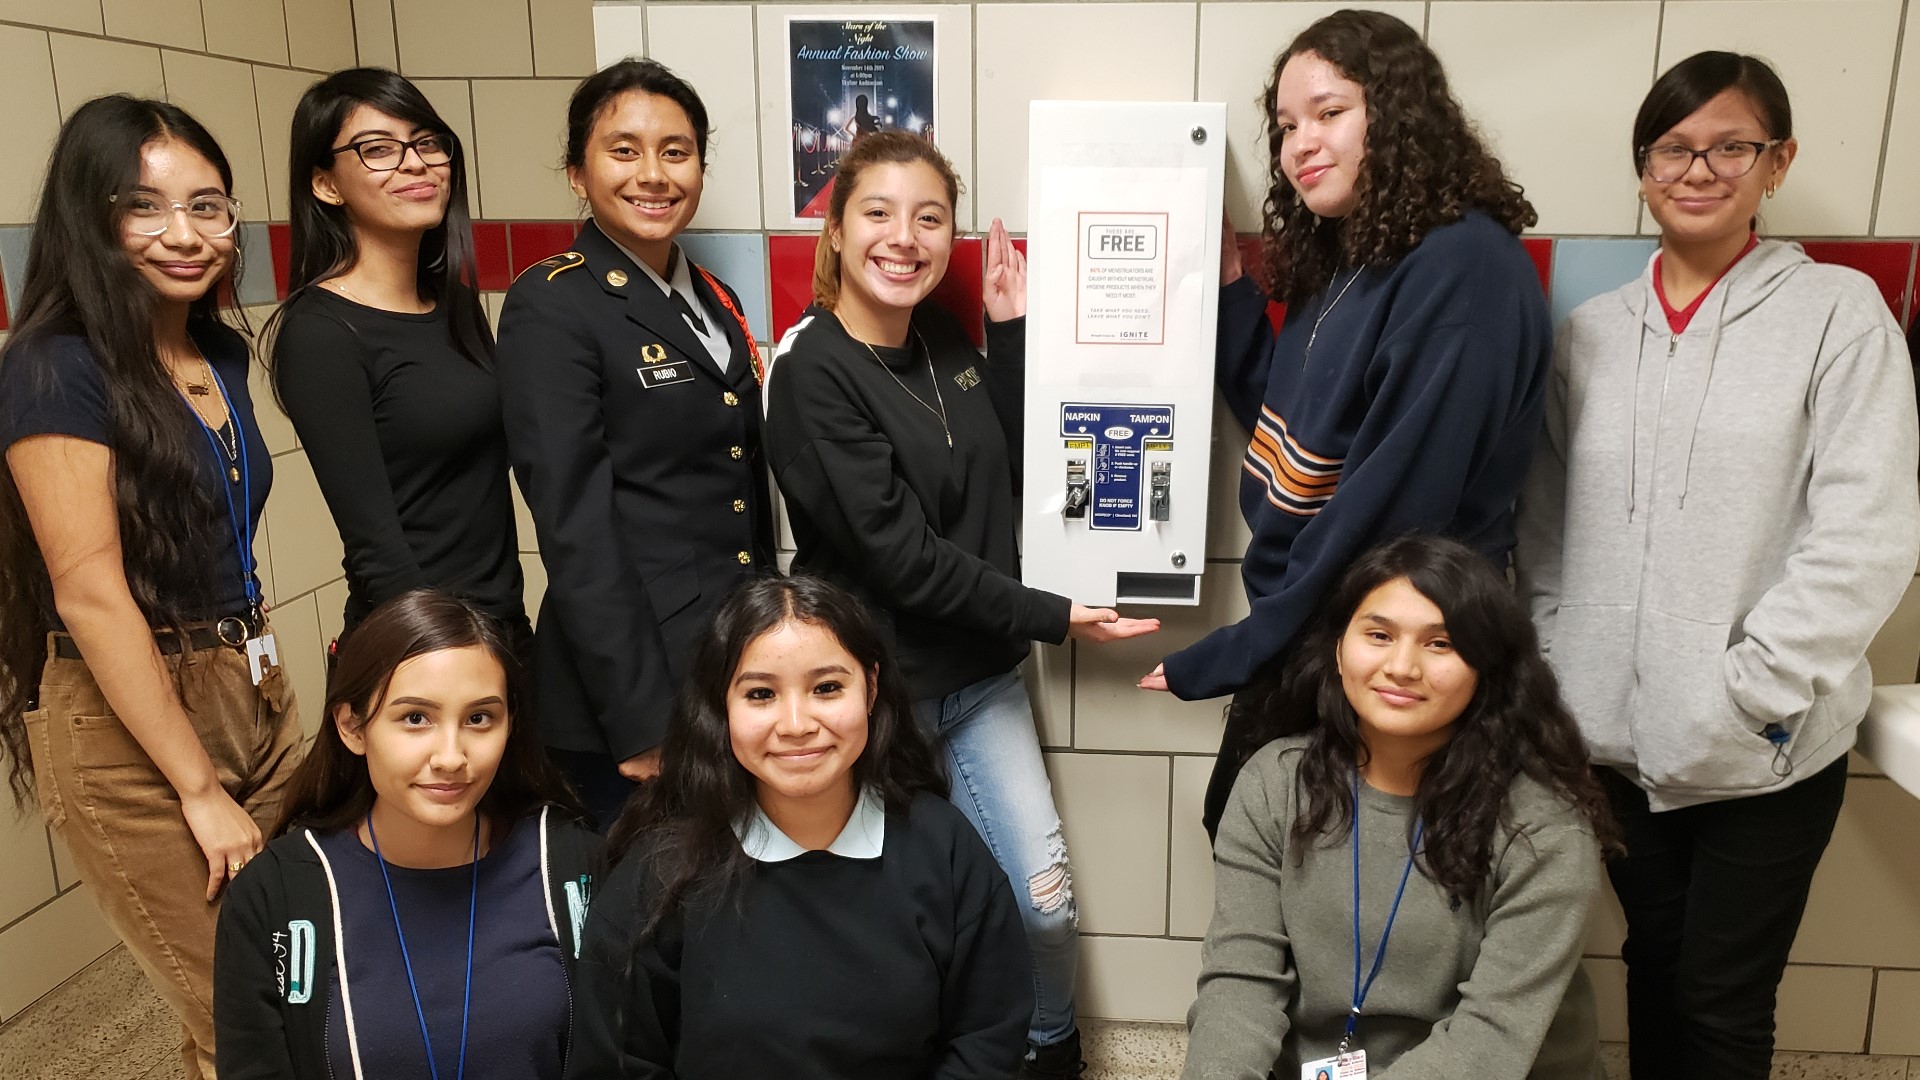 They wondered why tampons and pads were not available for free to students in school bathrooms. So, they lobbied the district and got policy changed.